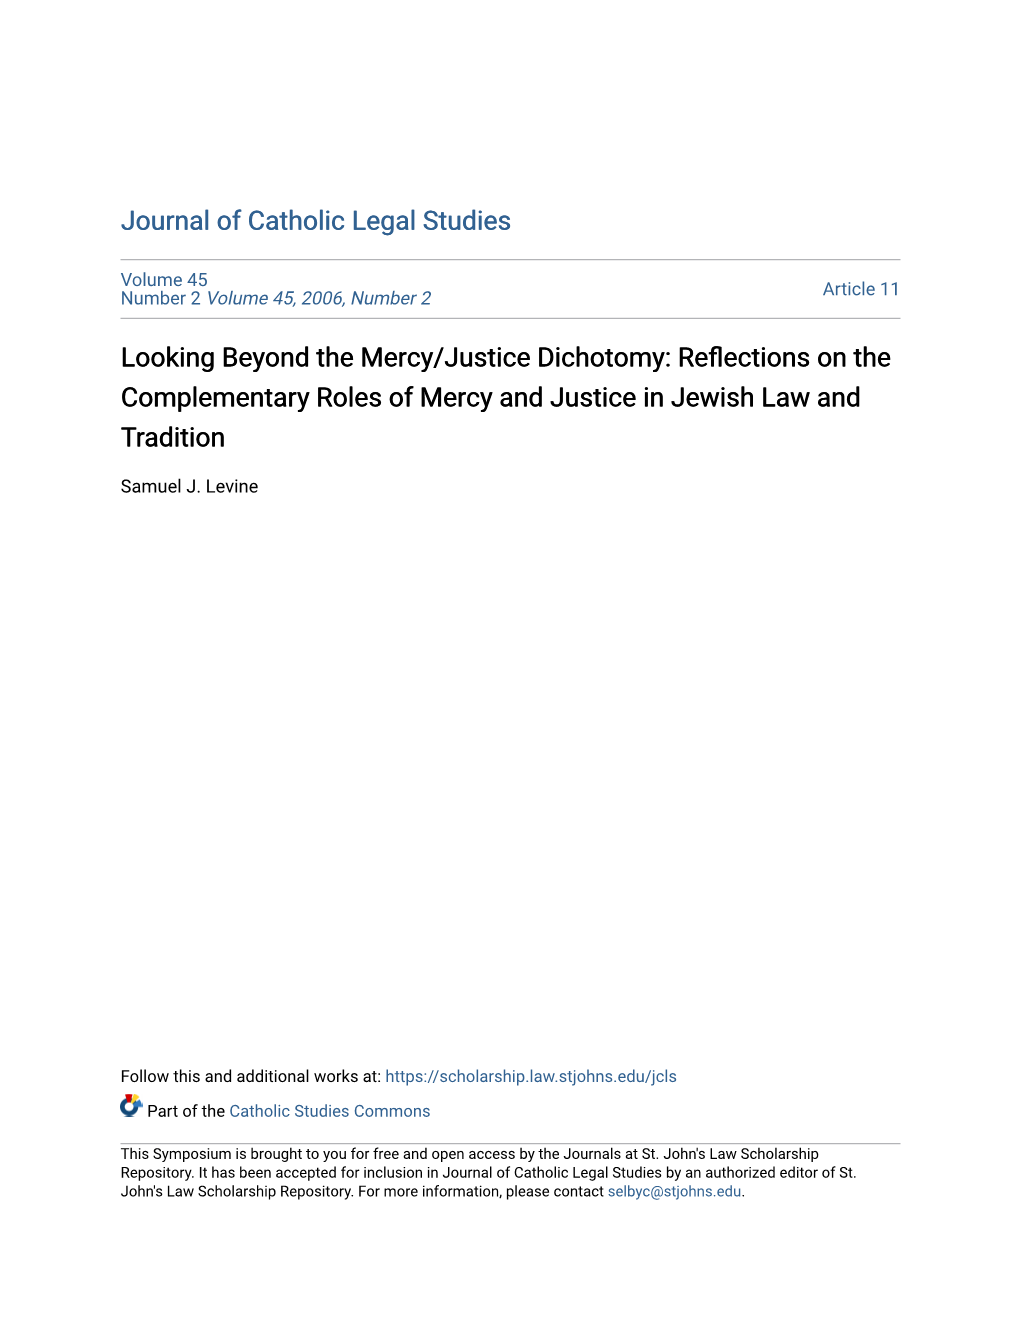 Reflections on the Complementary Roles of Mercy and Justice in Jewish Law and Tradition